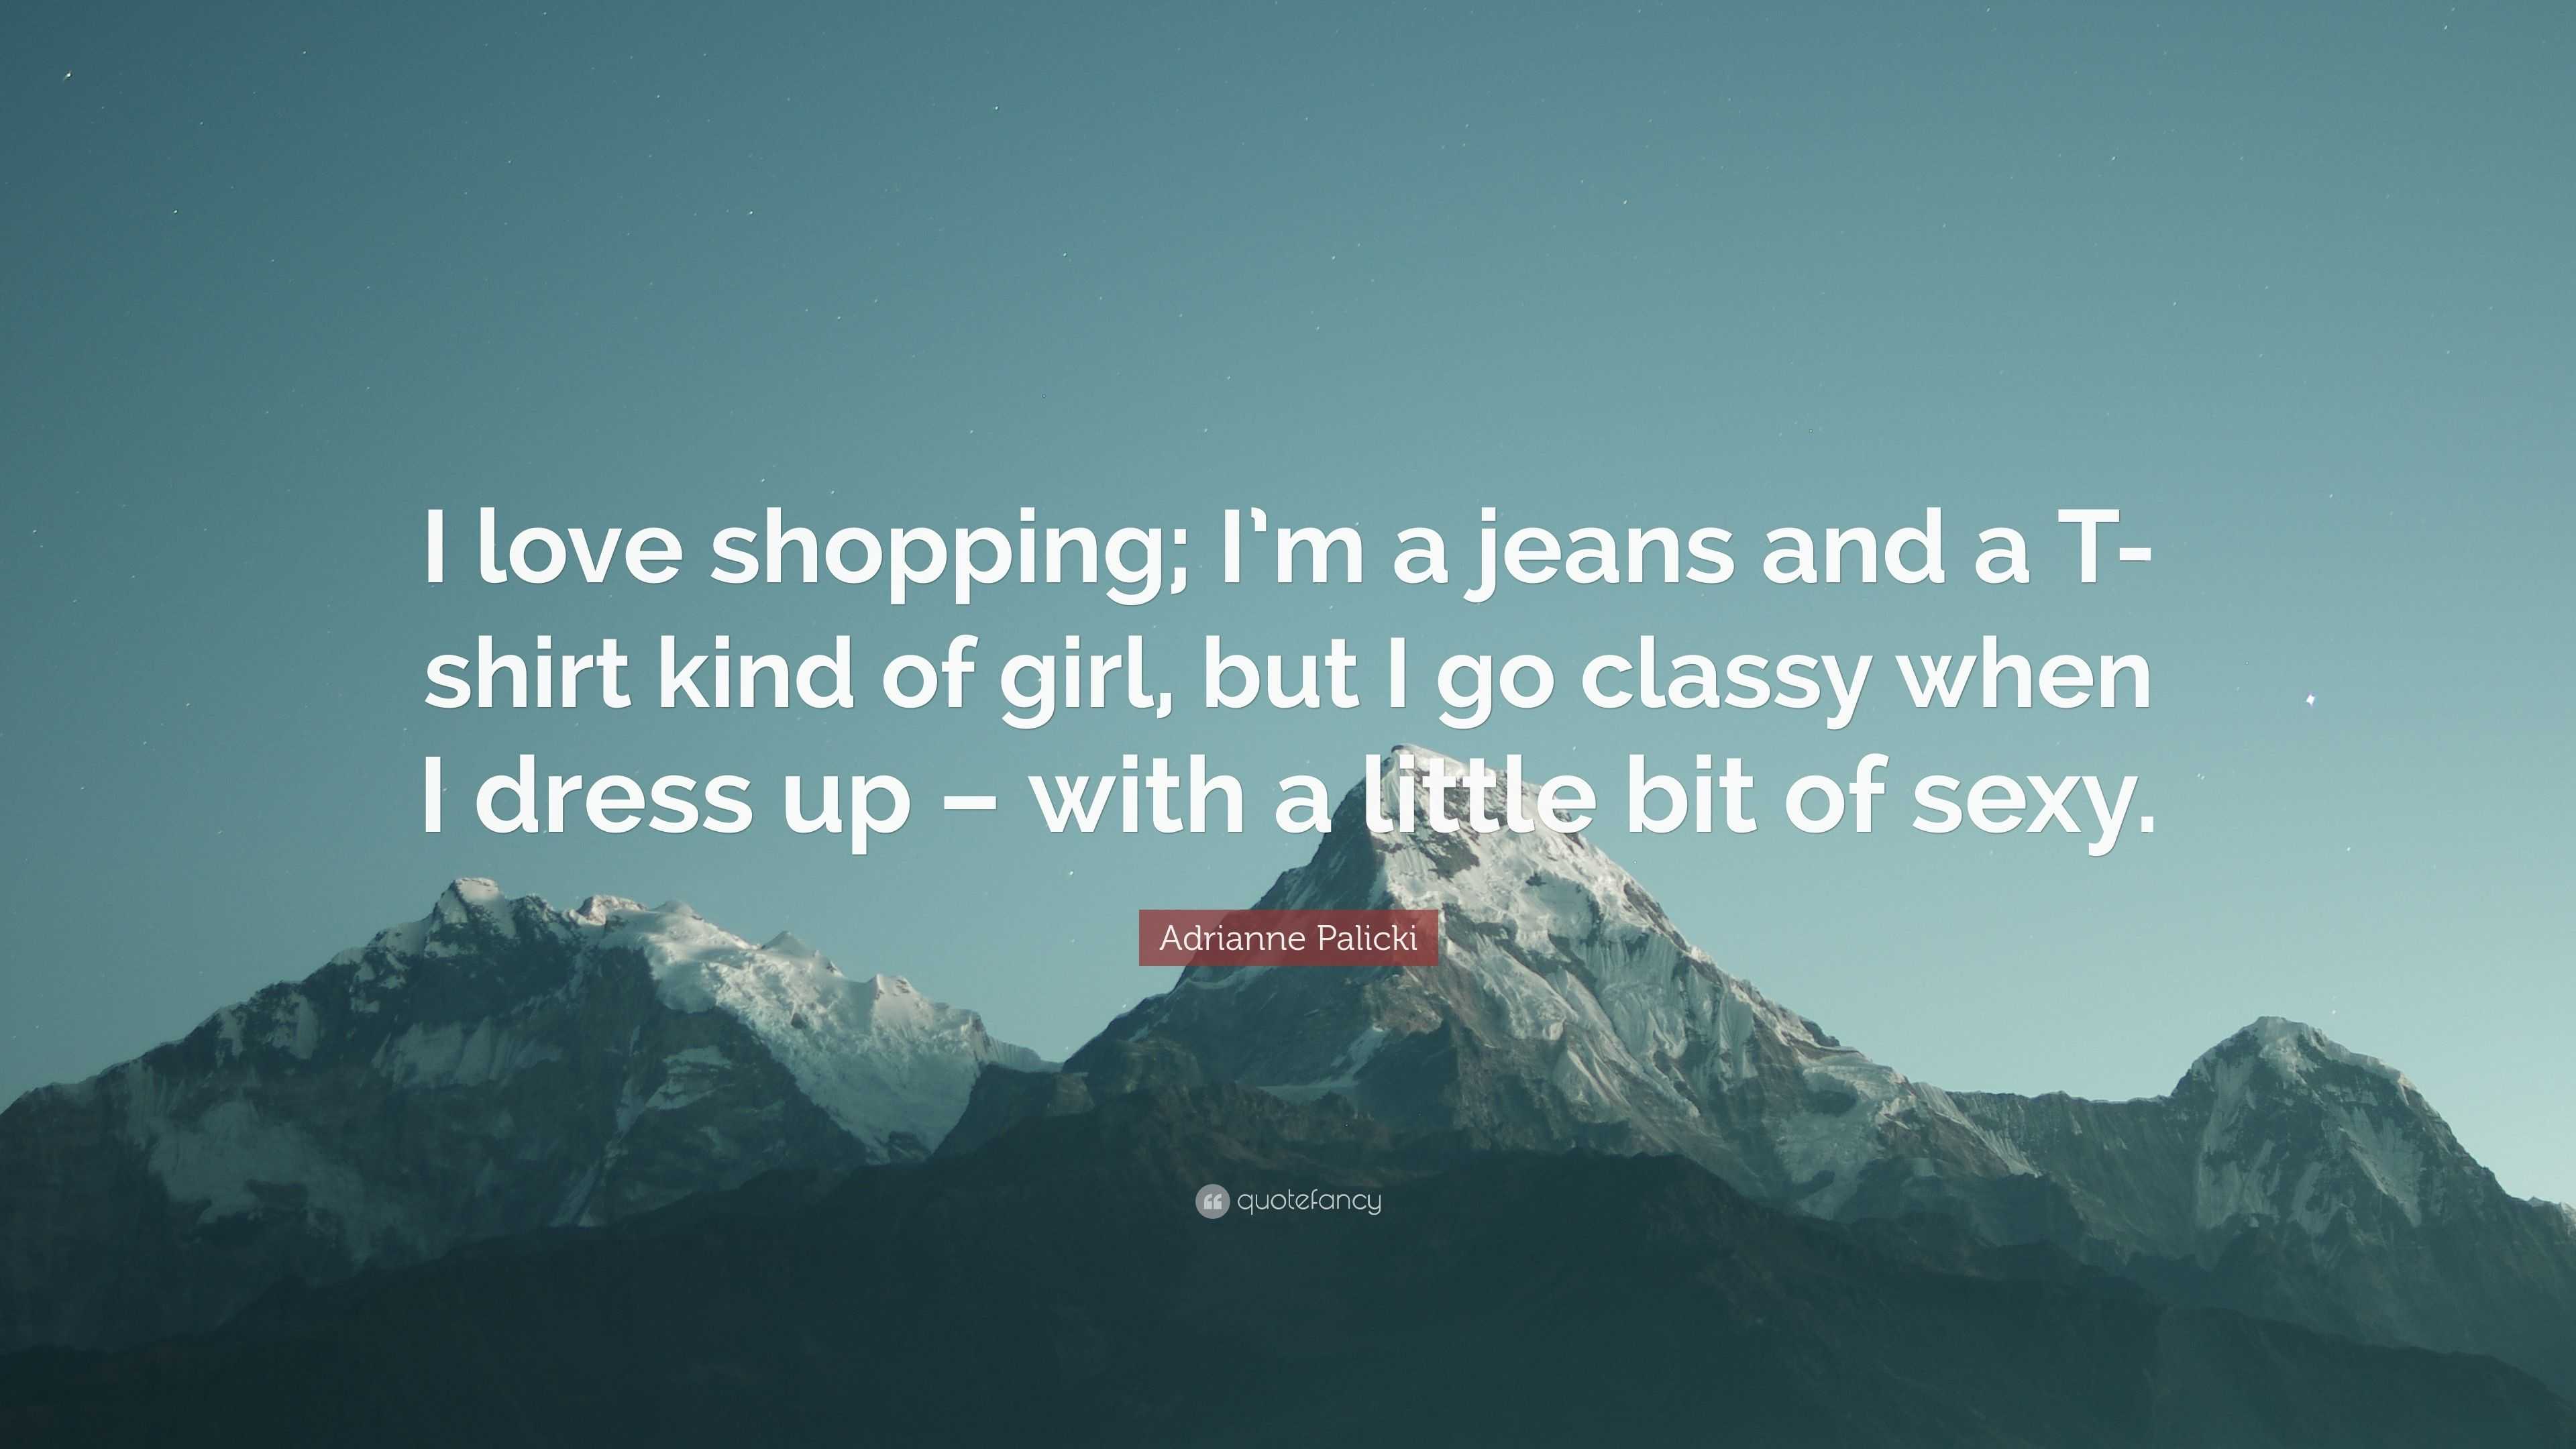 Adrianne Palicki Quote: “I love shopping; I’m a jeans and a T-shirt ...